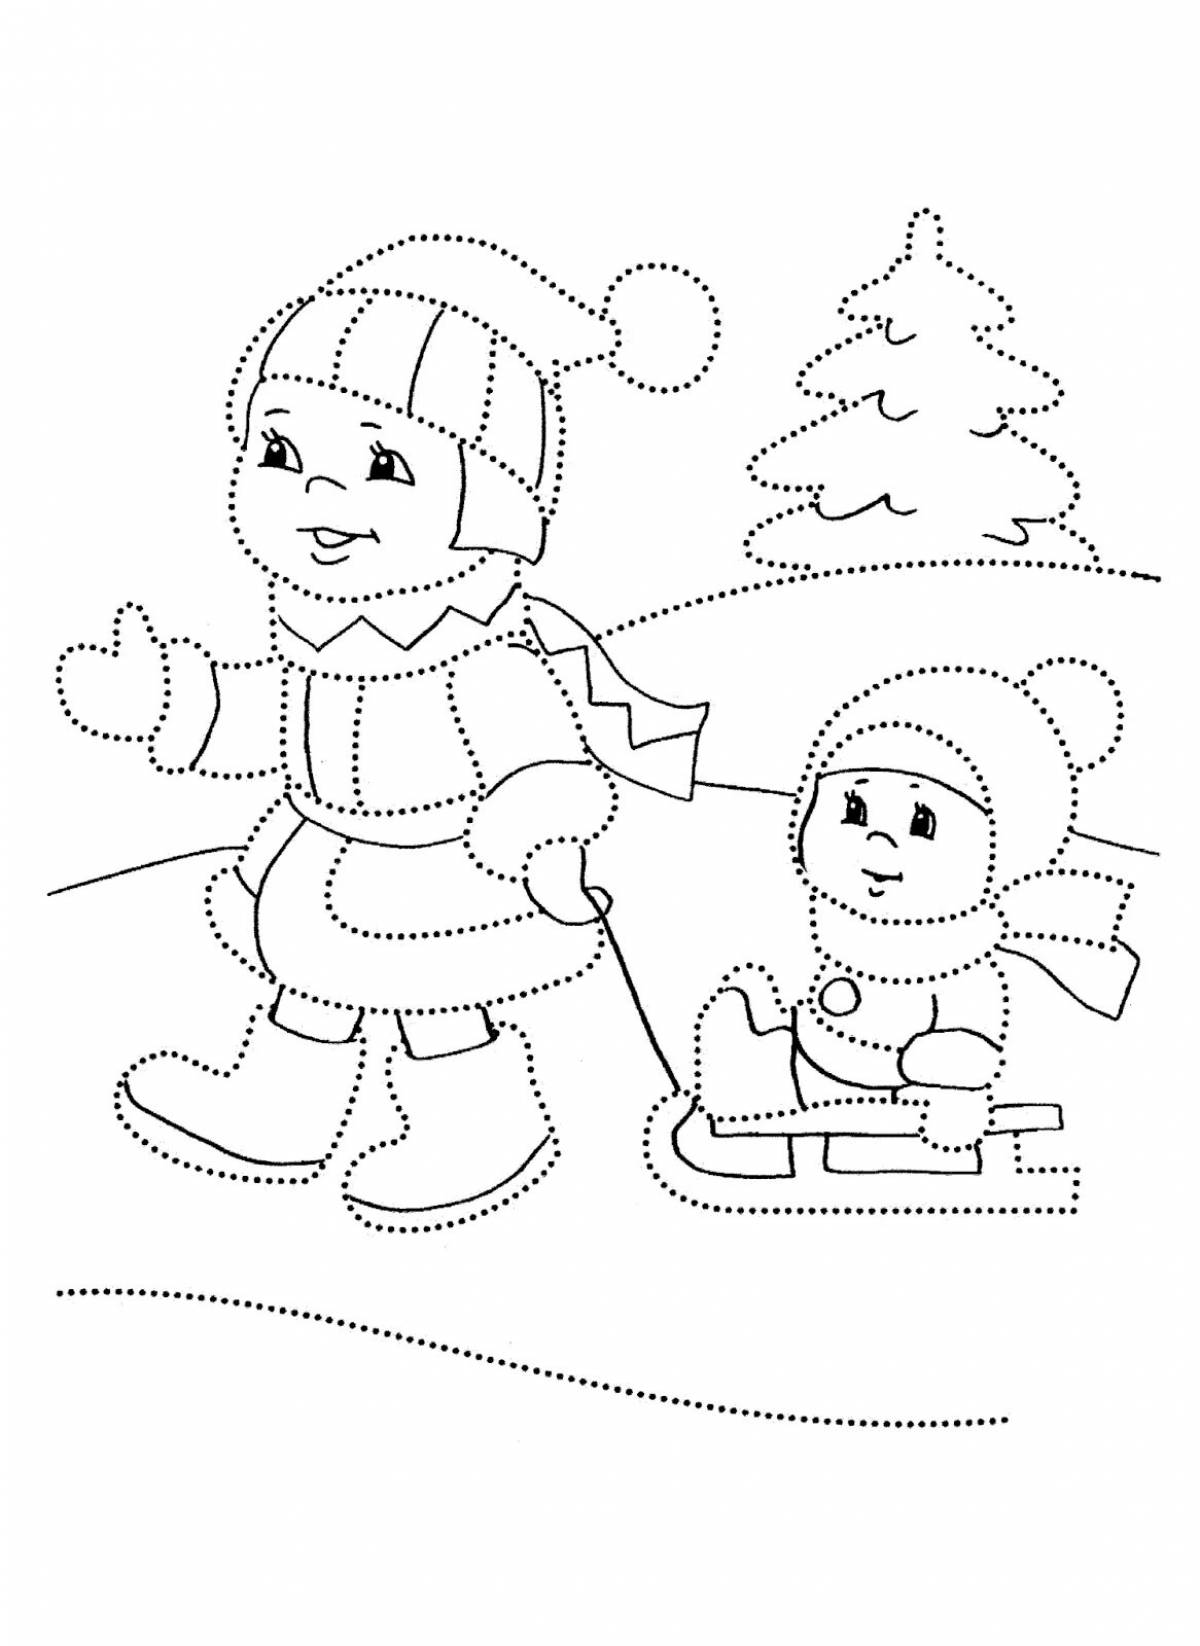 Splendid kys coloring pages for kids